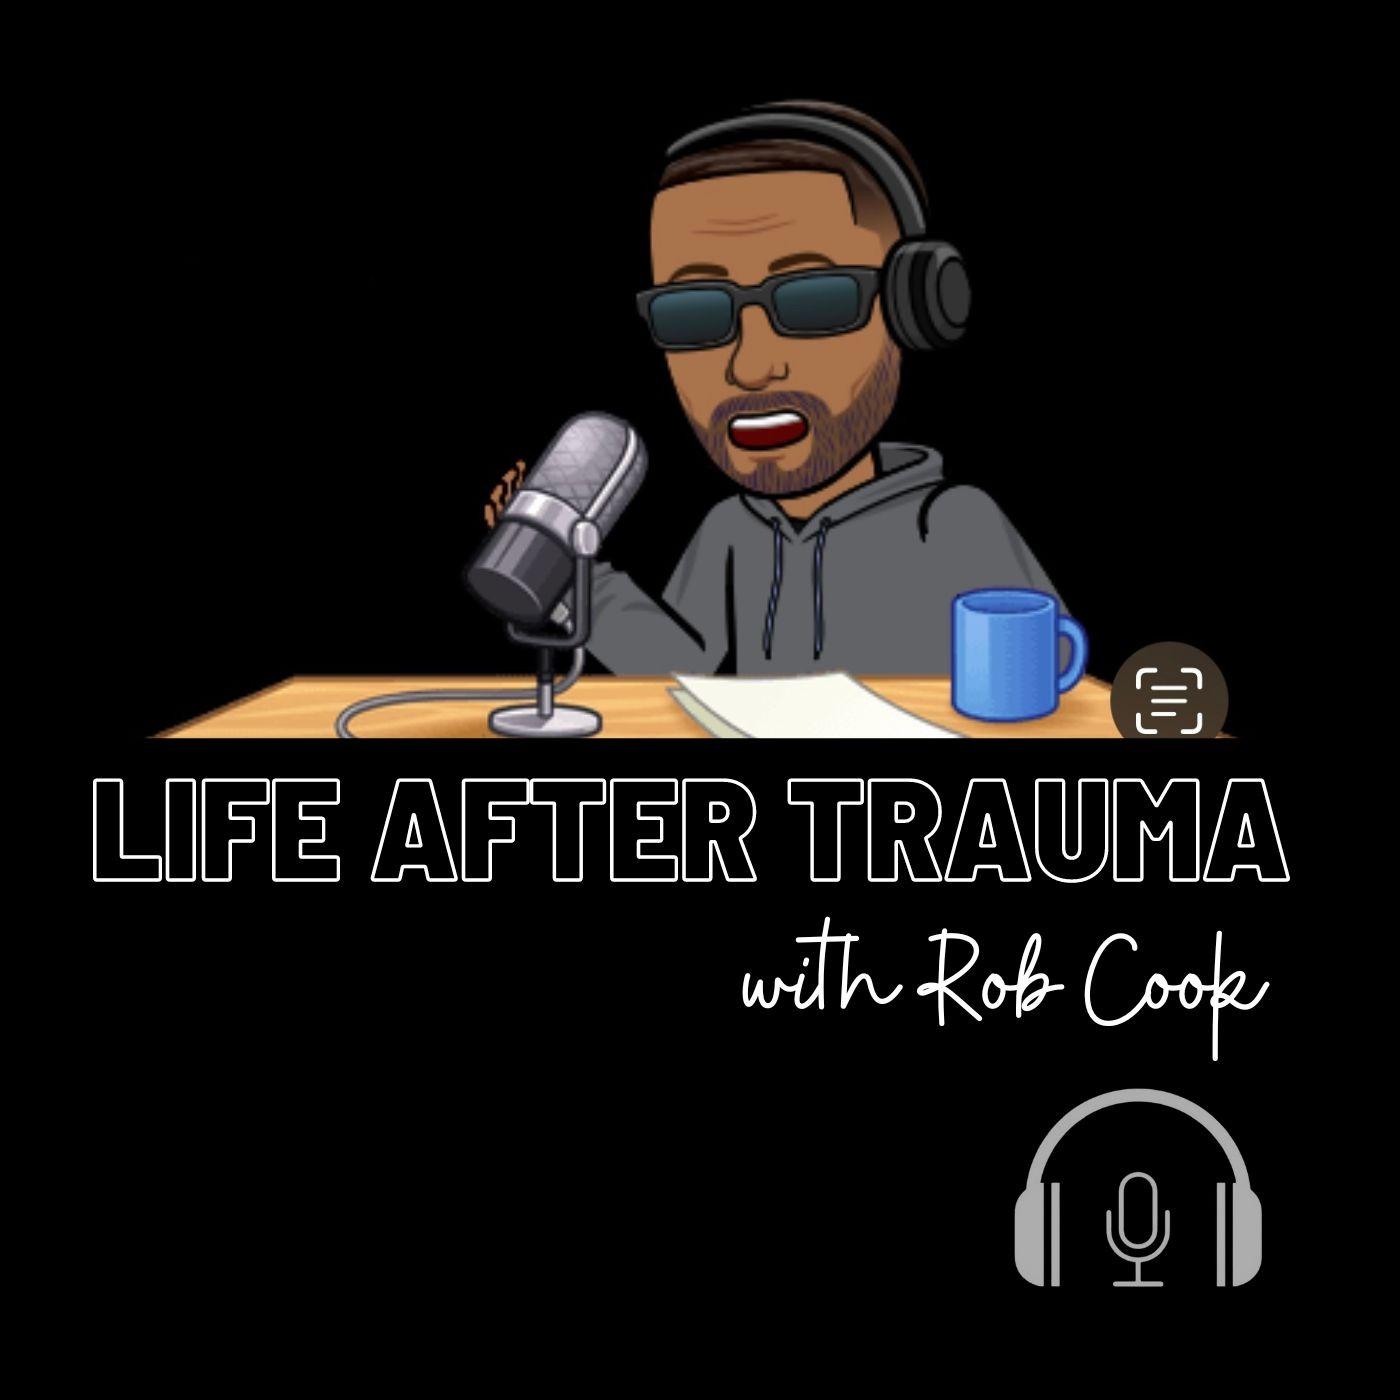 Life After Trauma with Rob Cook